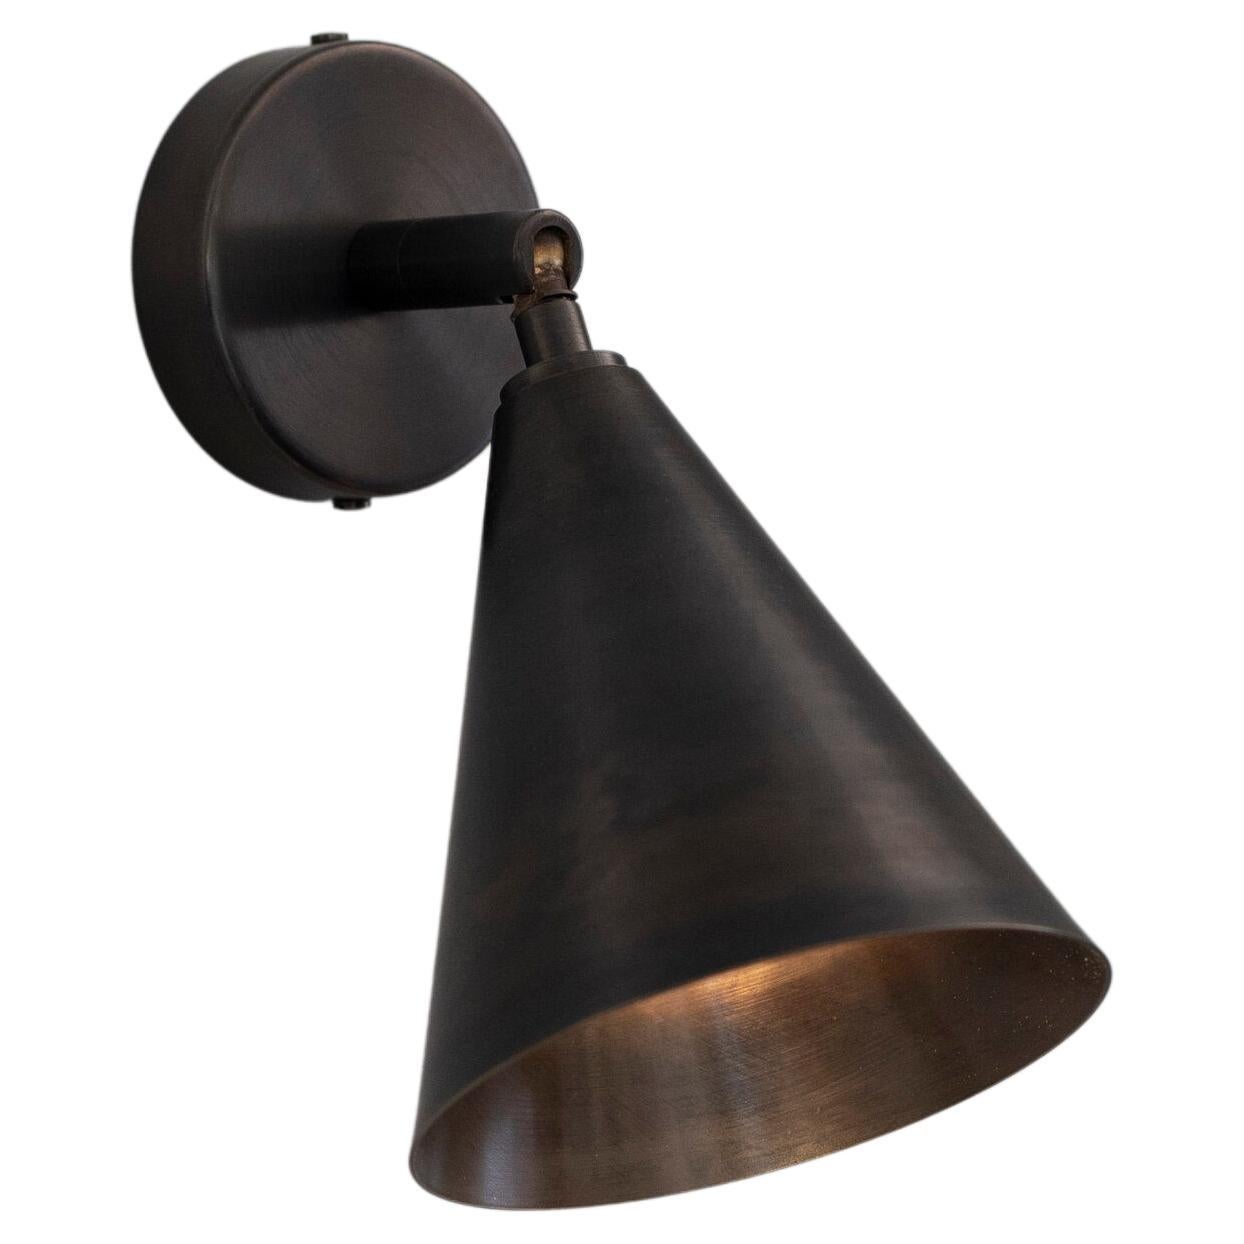 Cone Wandleuchte by Contain im Angebot